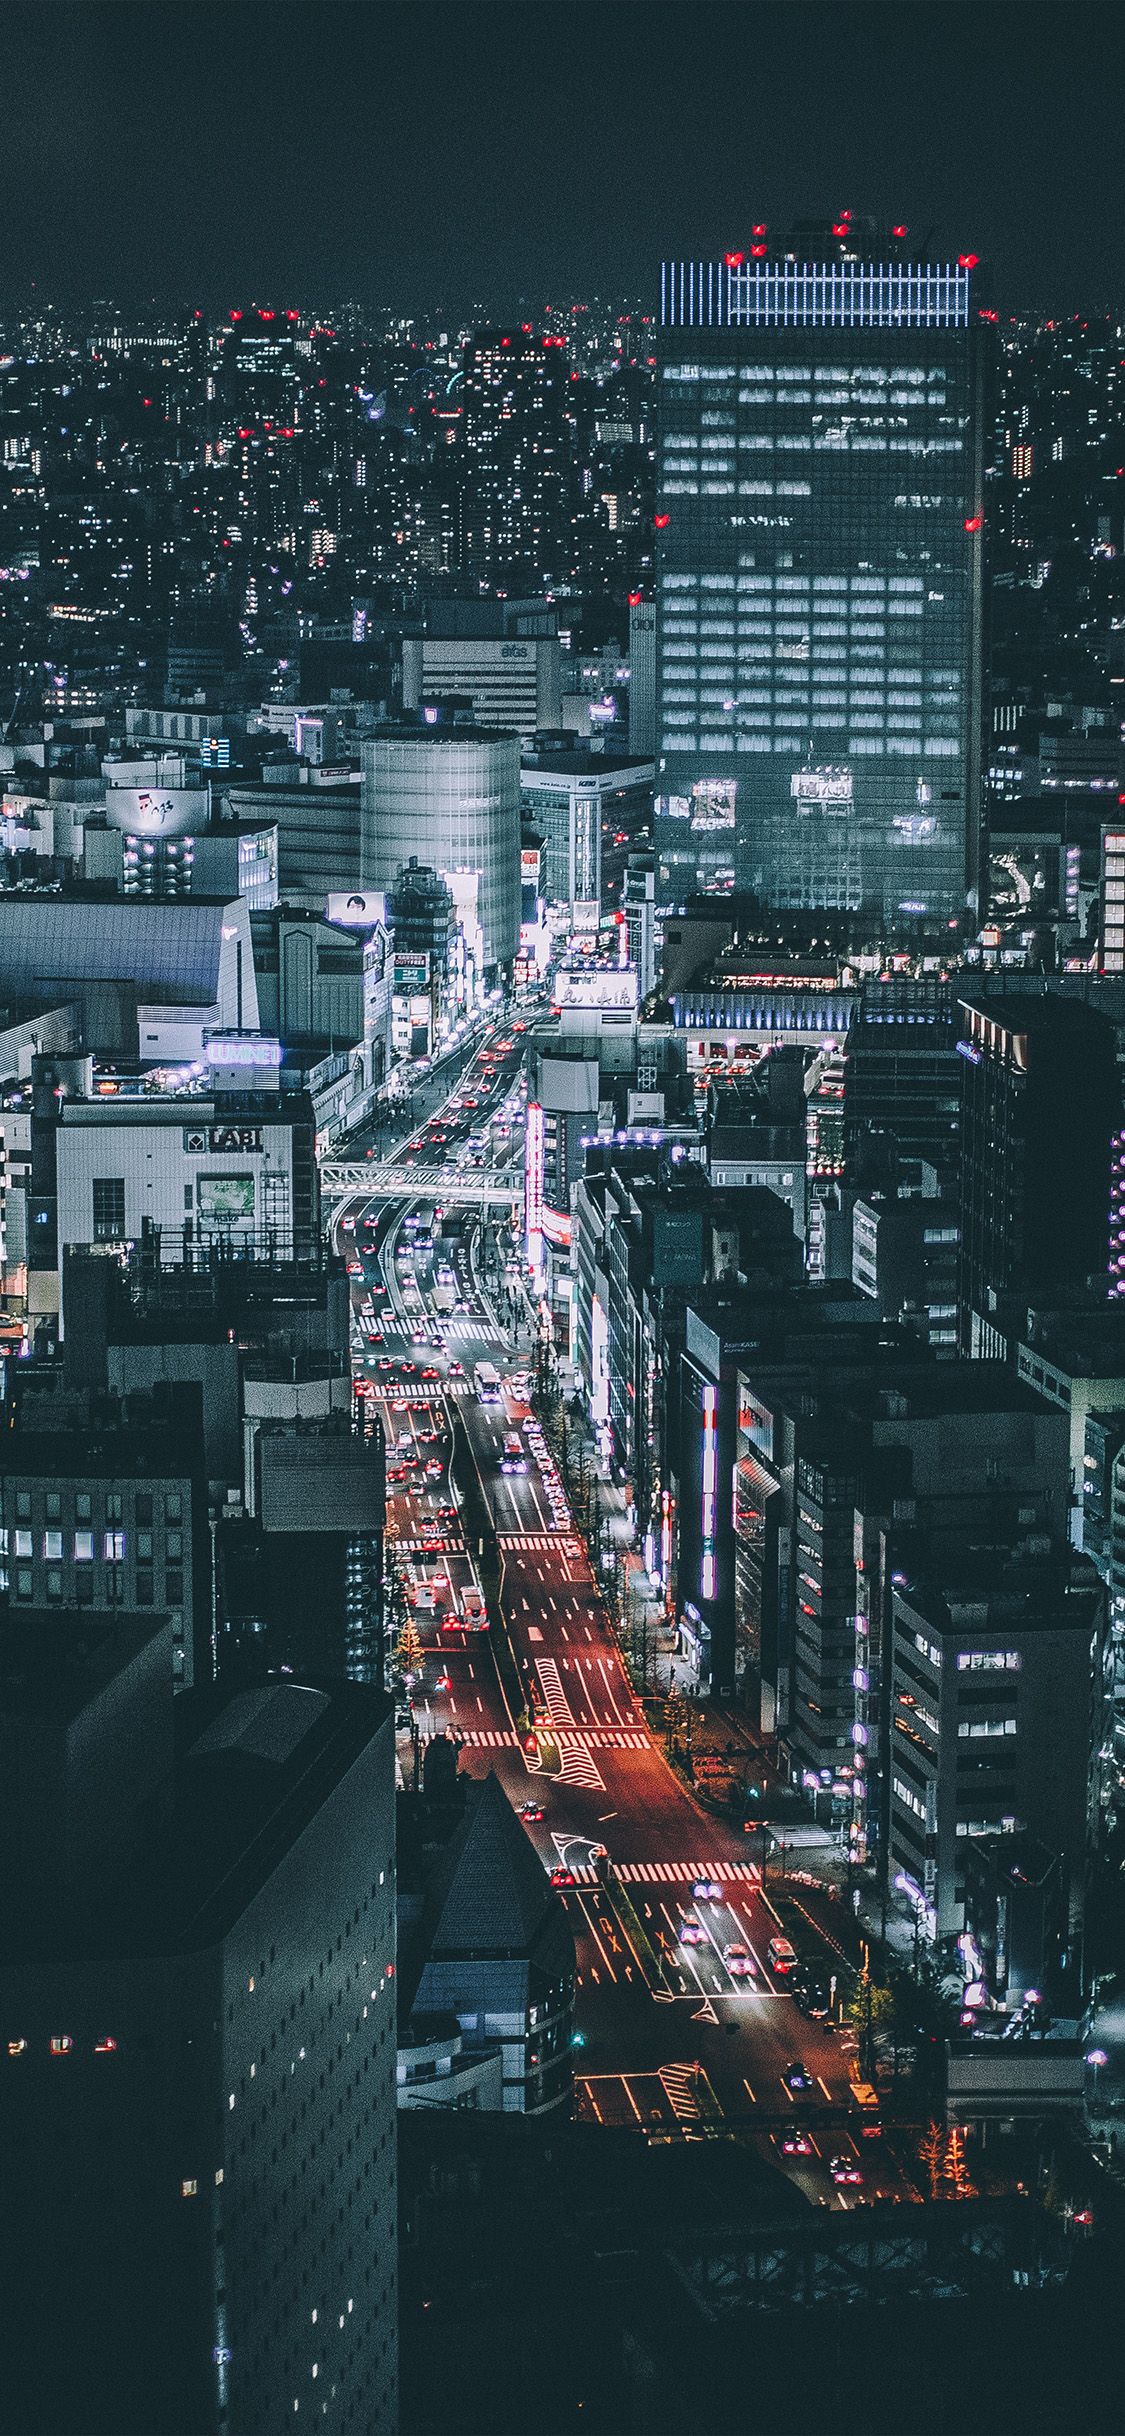 A city at night with the lights on - Anime city, architecture